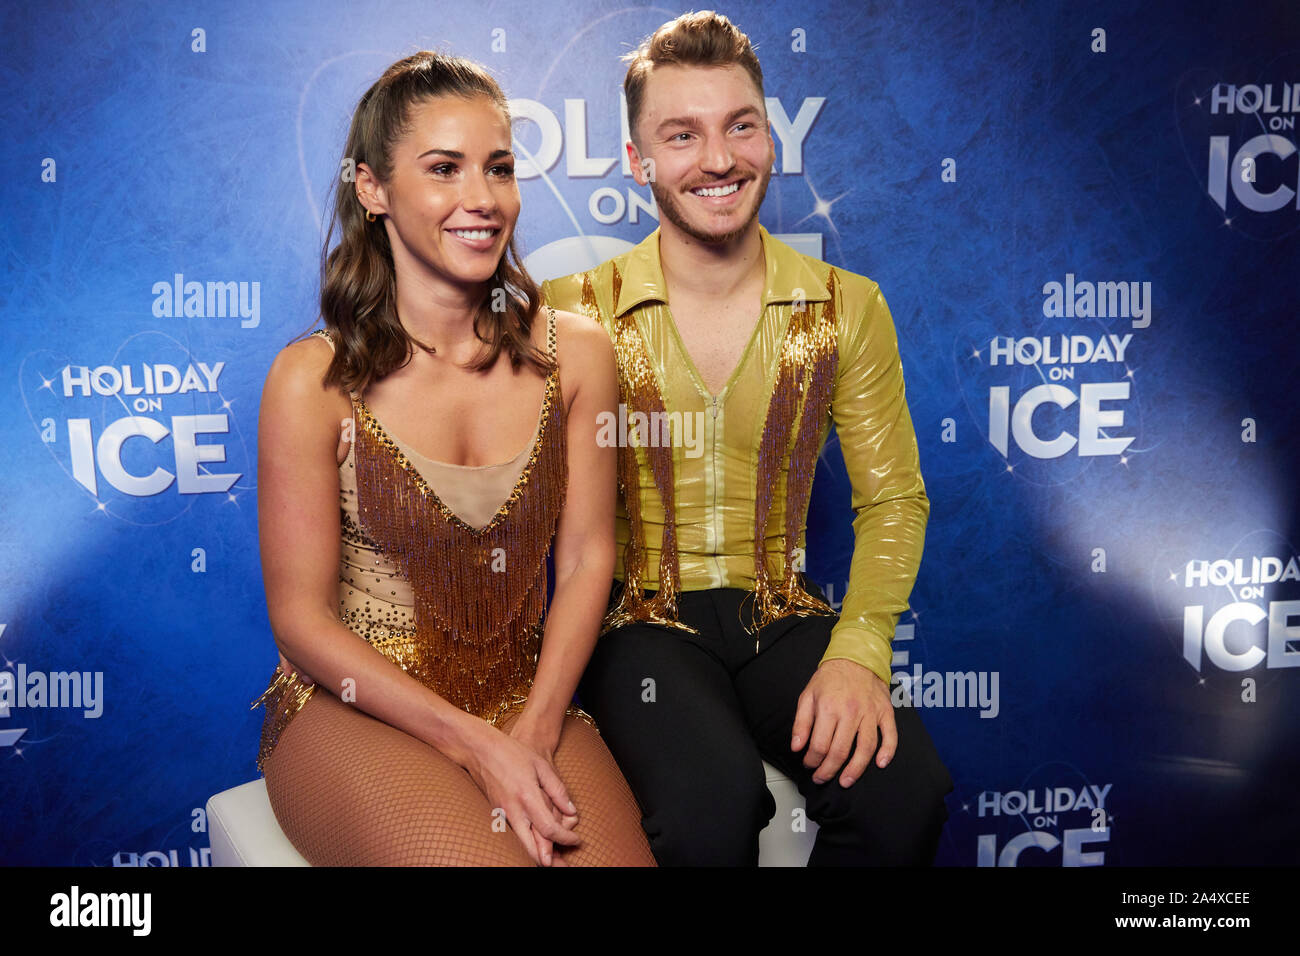 Hamburg, Germany. 16th Oct, 2019. Sarah Lombardi, pop singer, and Panagiotis 'Joti' Polizoakis, figure skater, give an interview to the Holiday on Ice Show 'Supernova'. Credit: Georg Wendt/dpa/Alamy Live News Stock Photo